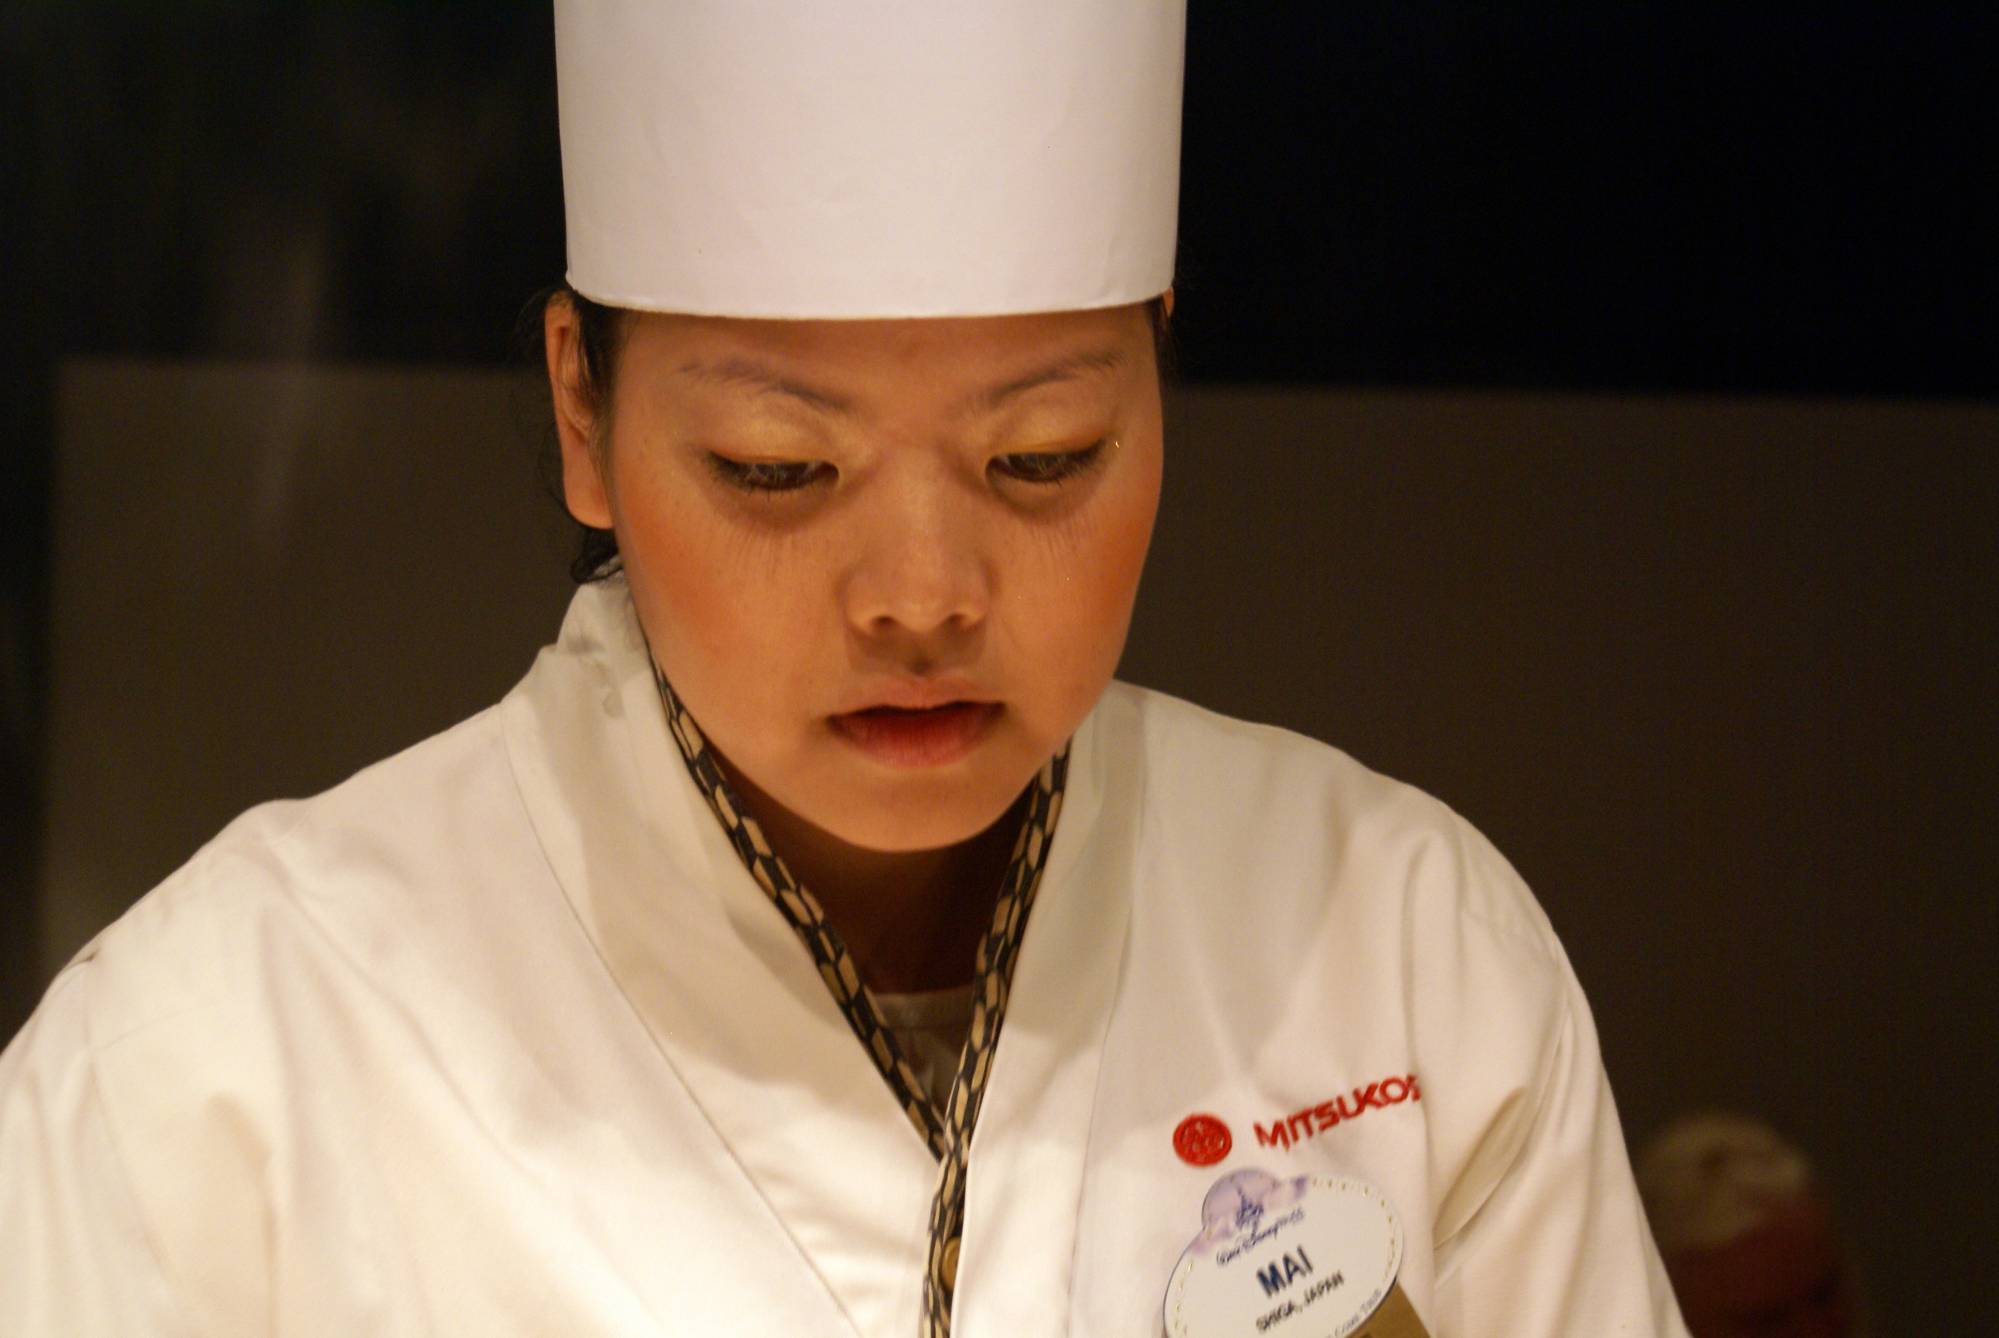 A Chef Upclose